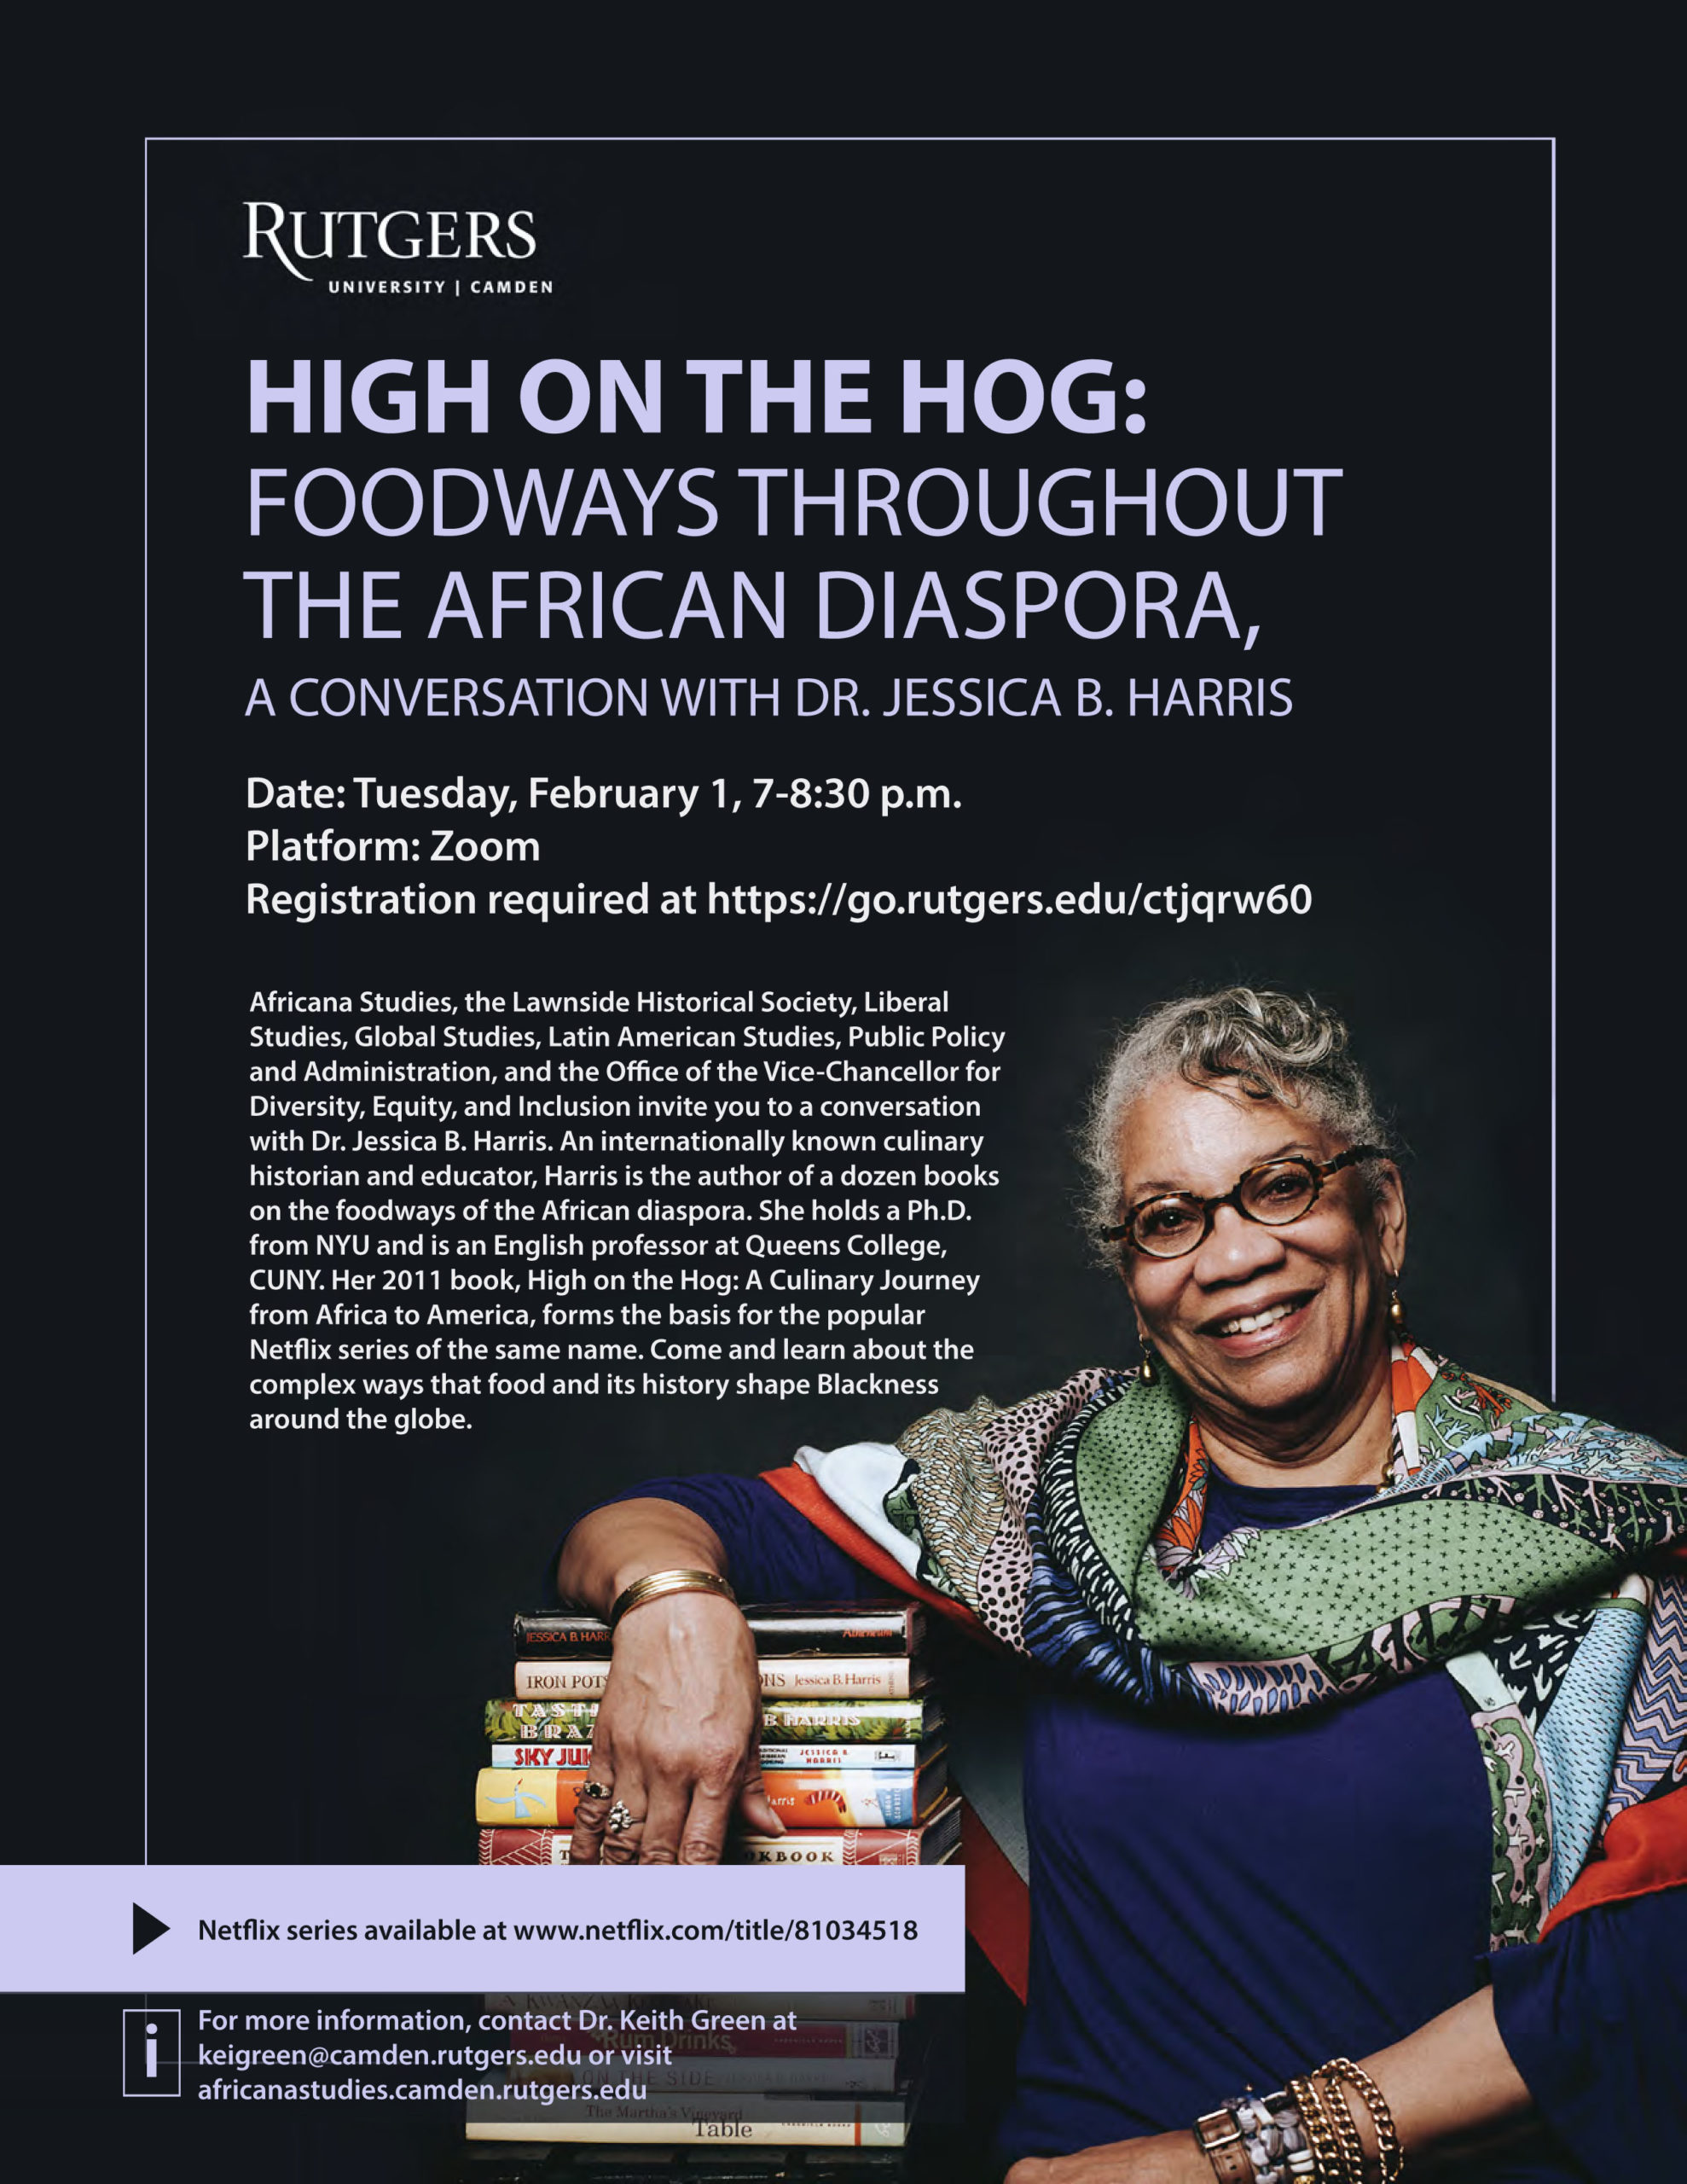 Foodways throughout the African Diaspora | A Conversation with Dr. Jessica B. Harris